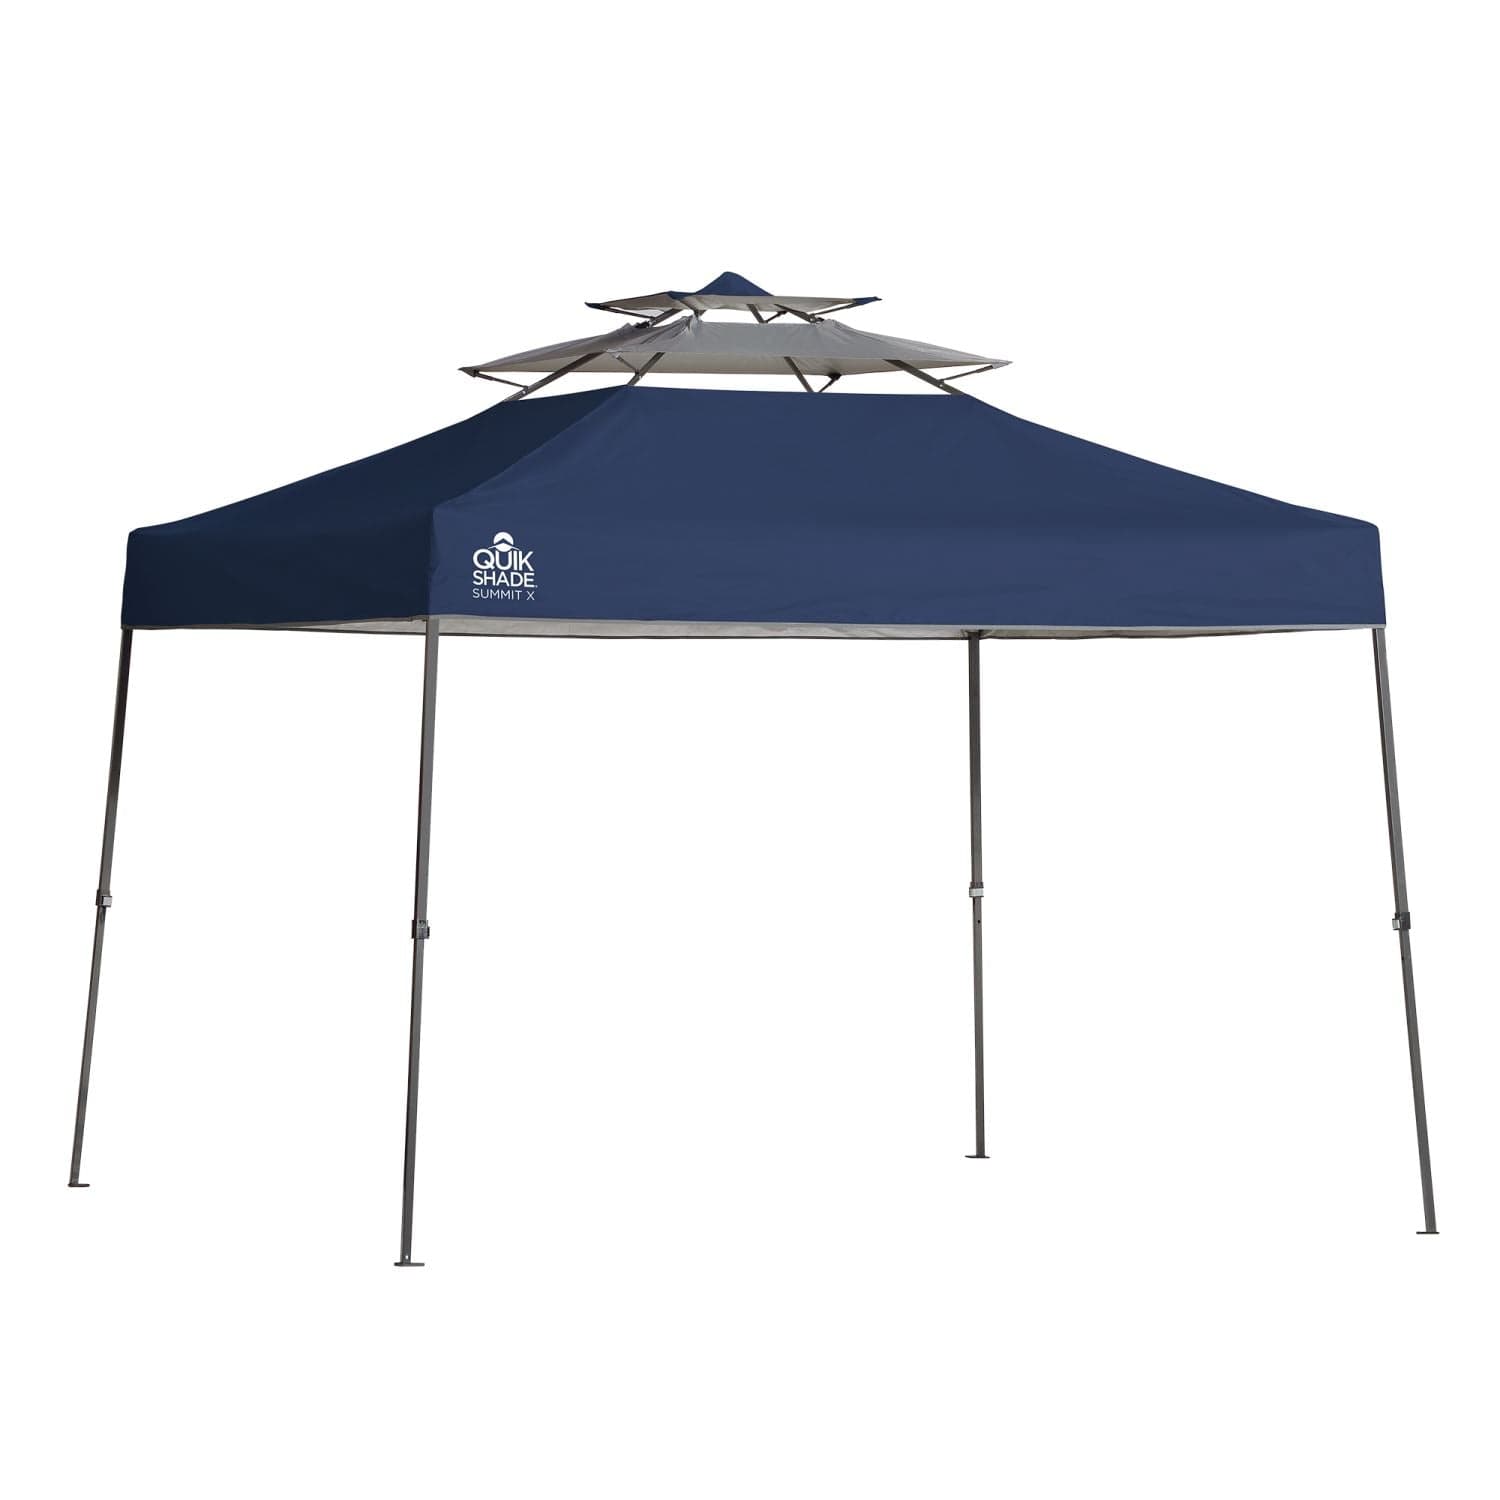 The Fulfiller Pop Up Canopies Quik Shade | Summit SX100 10' X 10' Straight Leg Canopy - Blue 167518DS